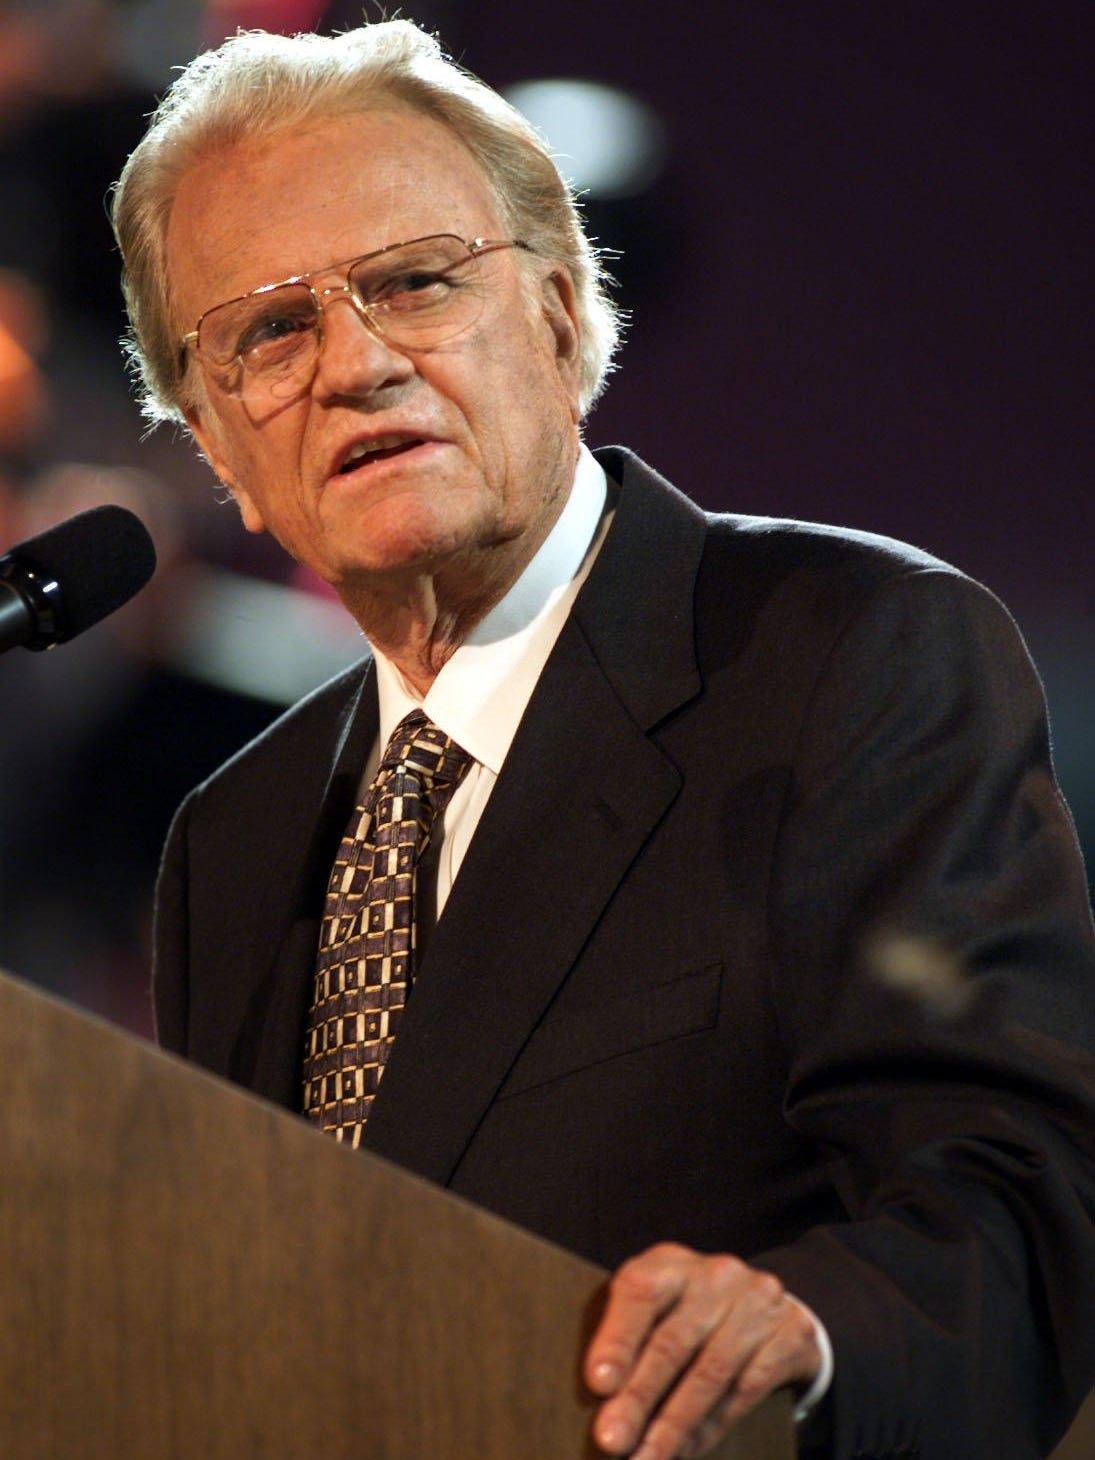 DOWNLOAD MP3: A CURE FOR HEART TROUBLE By Evangelist Billy Graham. (sermon) 22